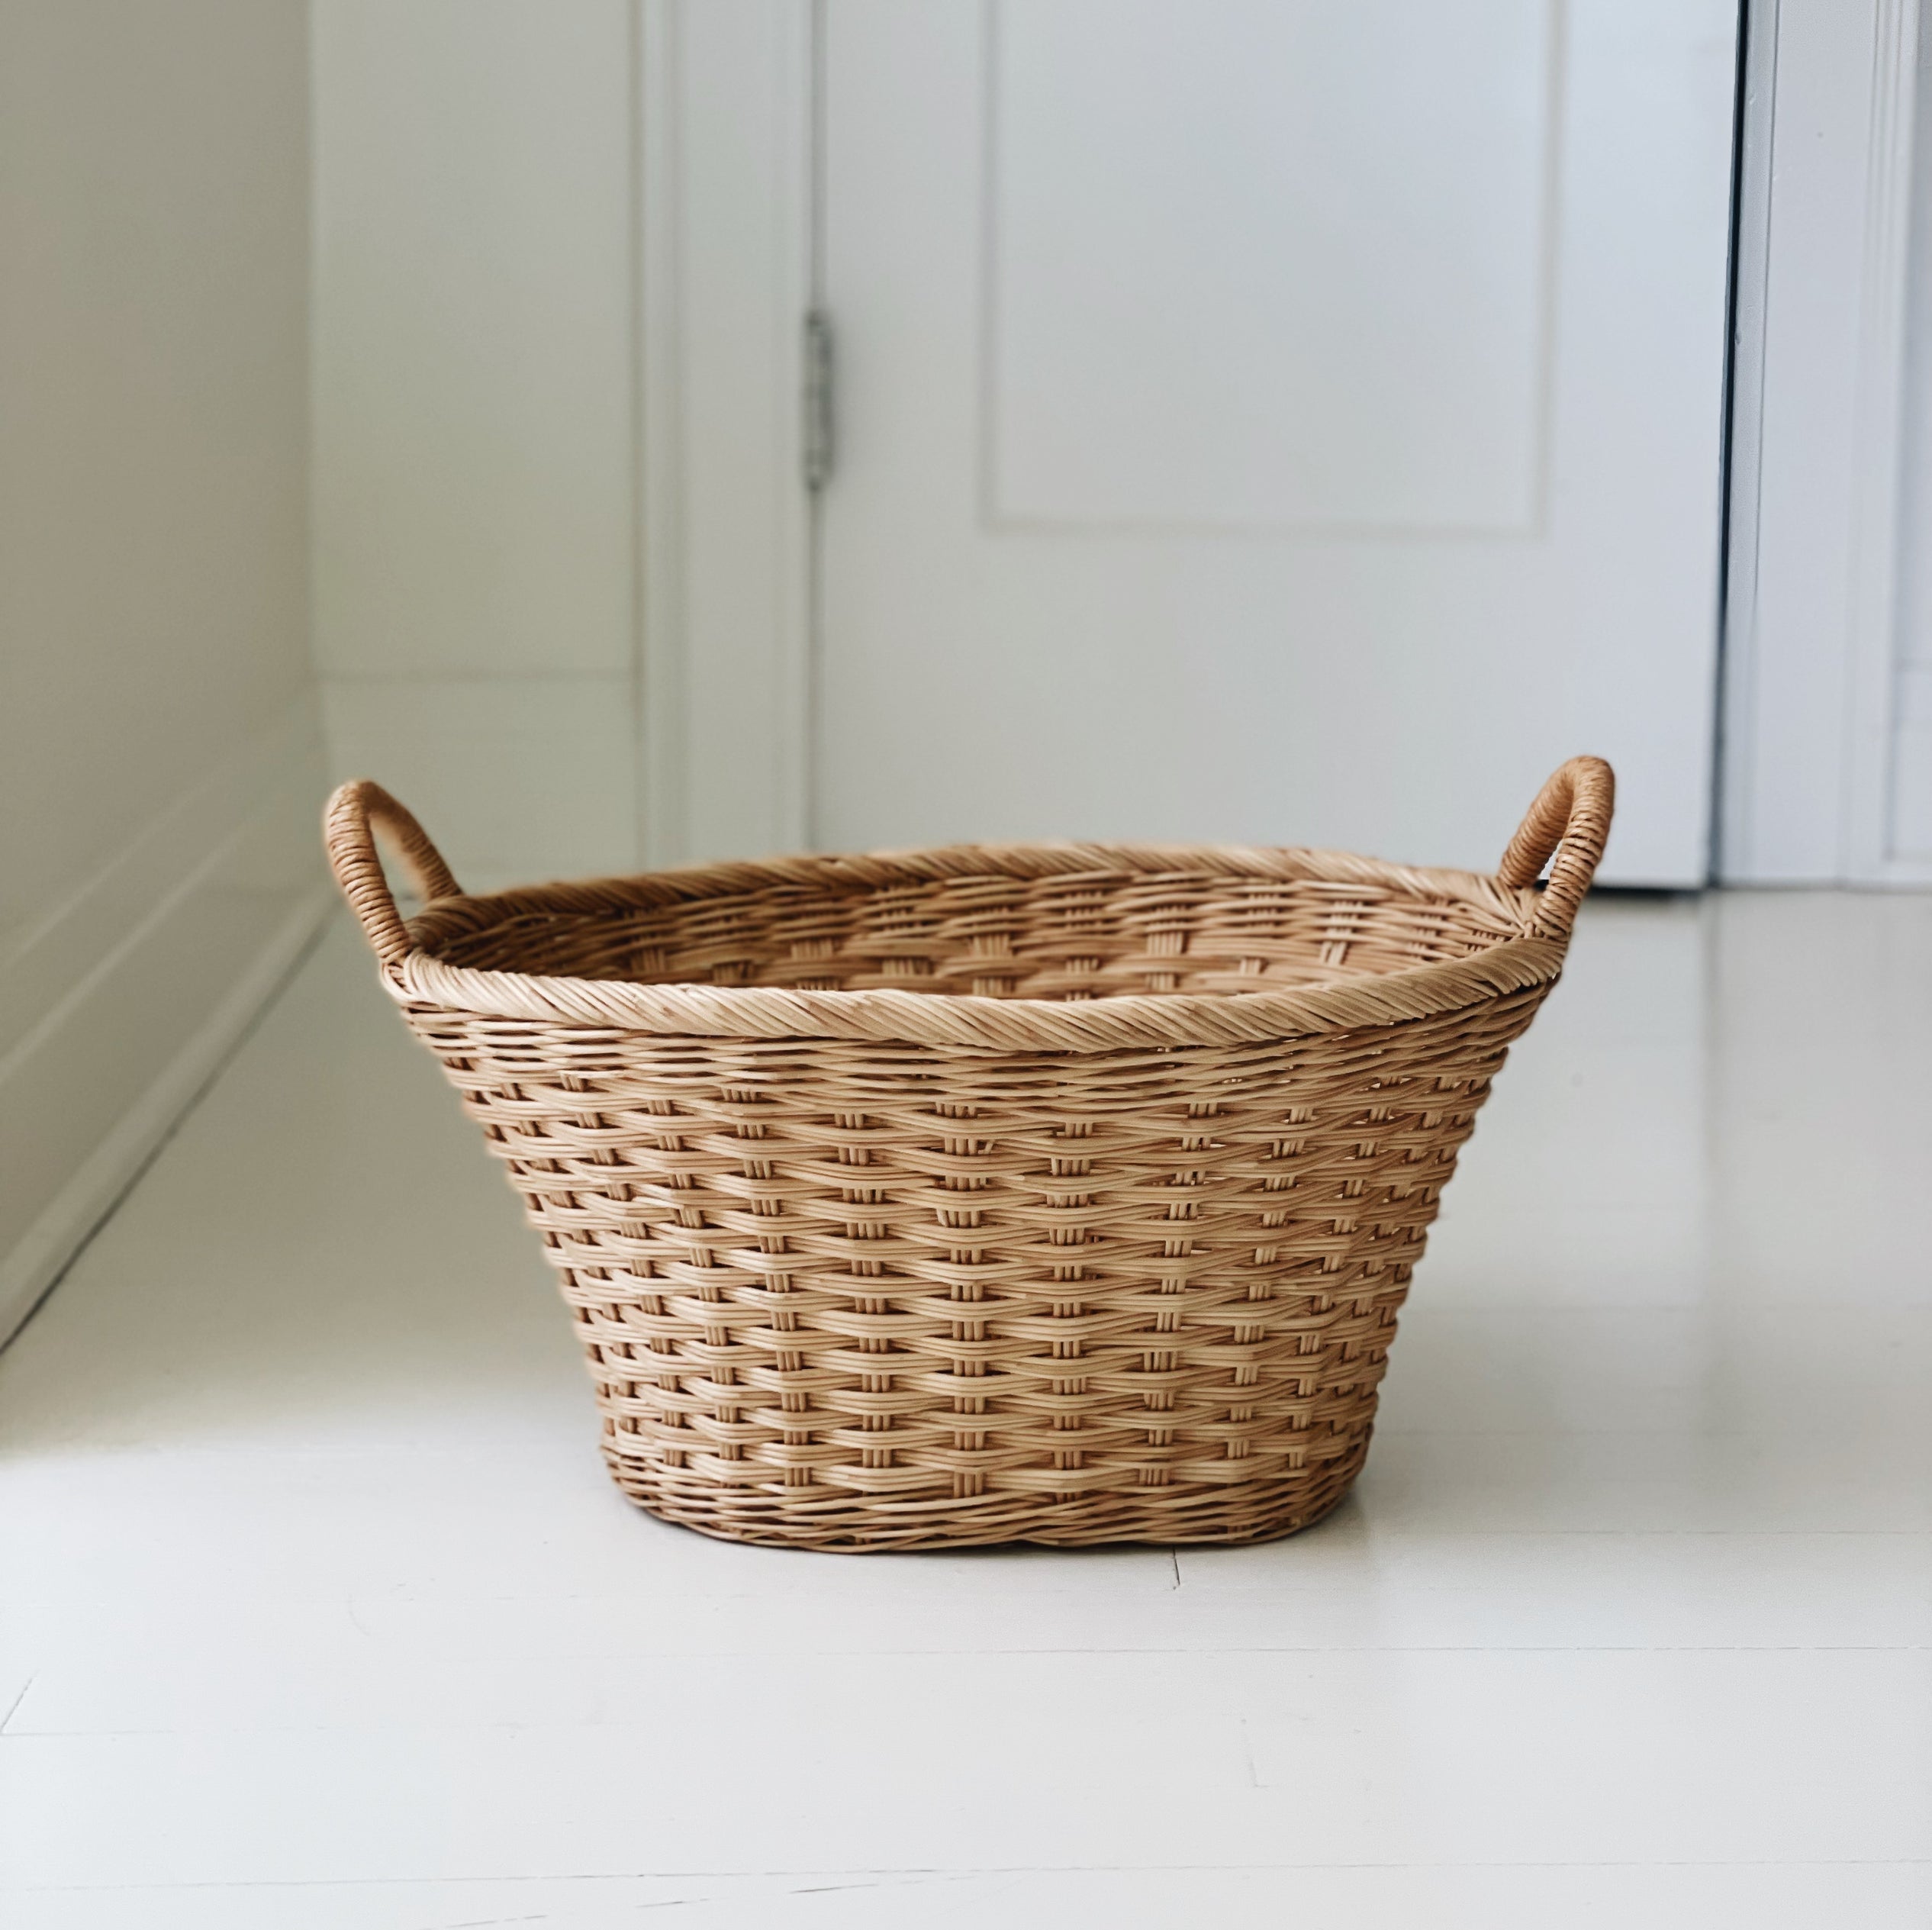 Collapsible Plastic Oval Laundry Basket, Oval Plastic Collapsible Laundry  Basket, Oval Collapsible Laundry Basket, For Shopping Basket, Fruit Basket